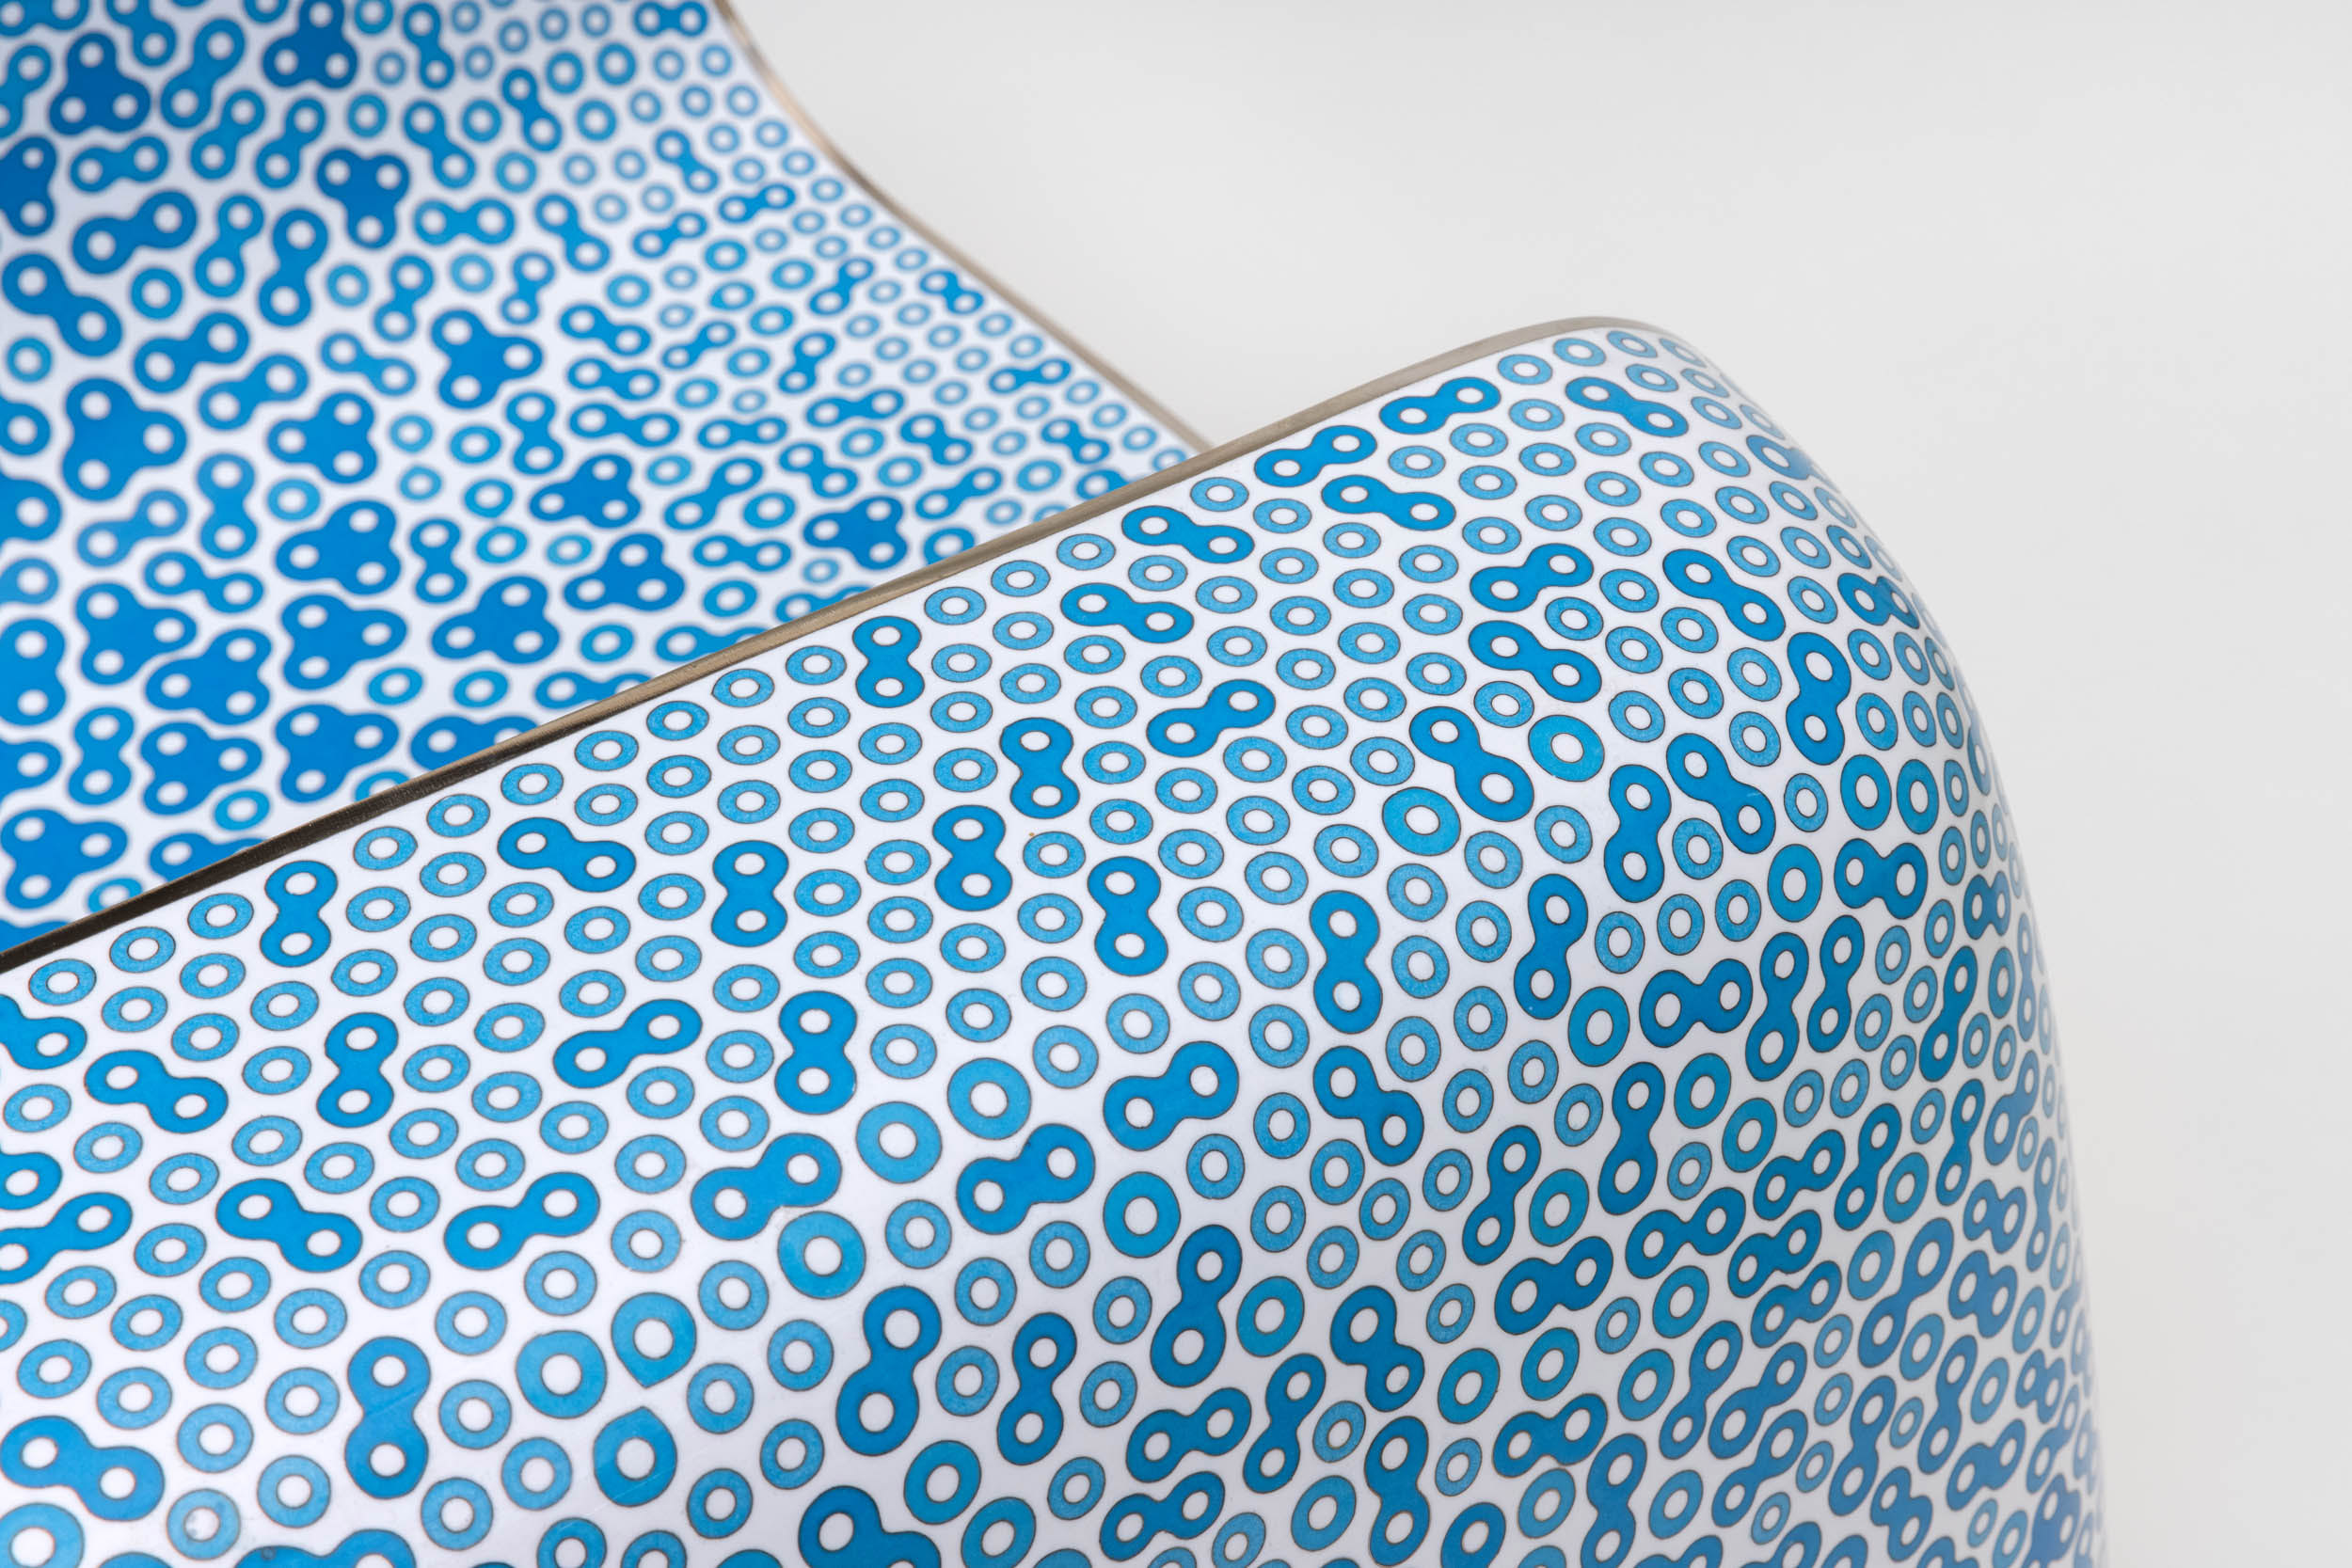 Detail of blue enamel chair by Marc Newson